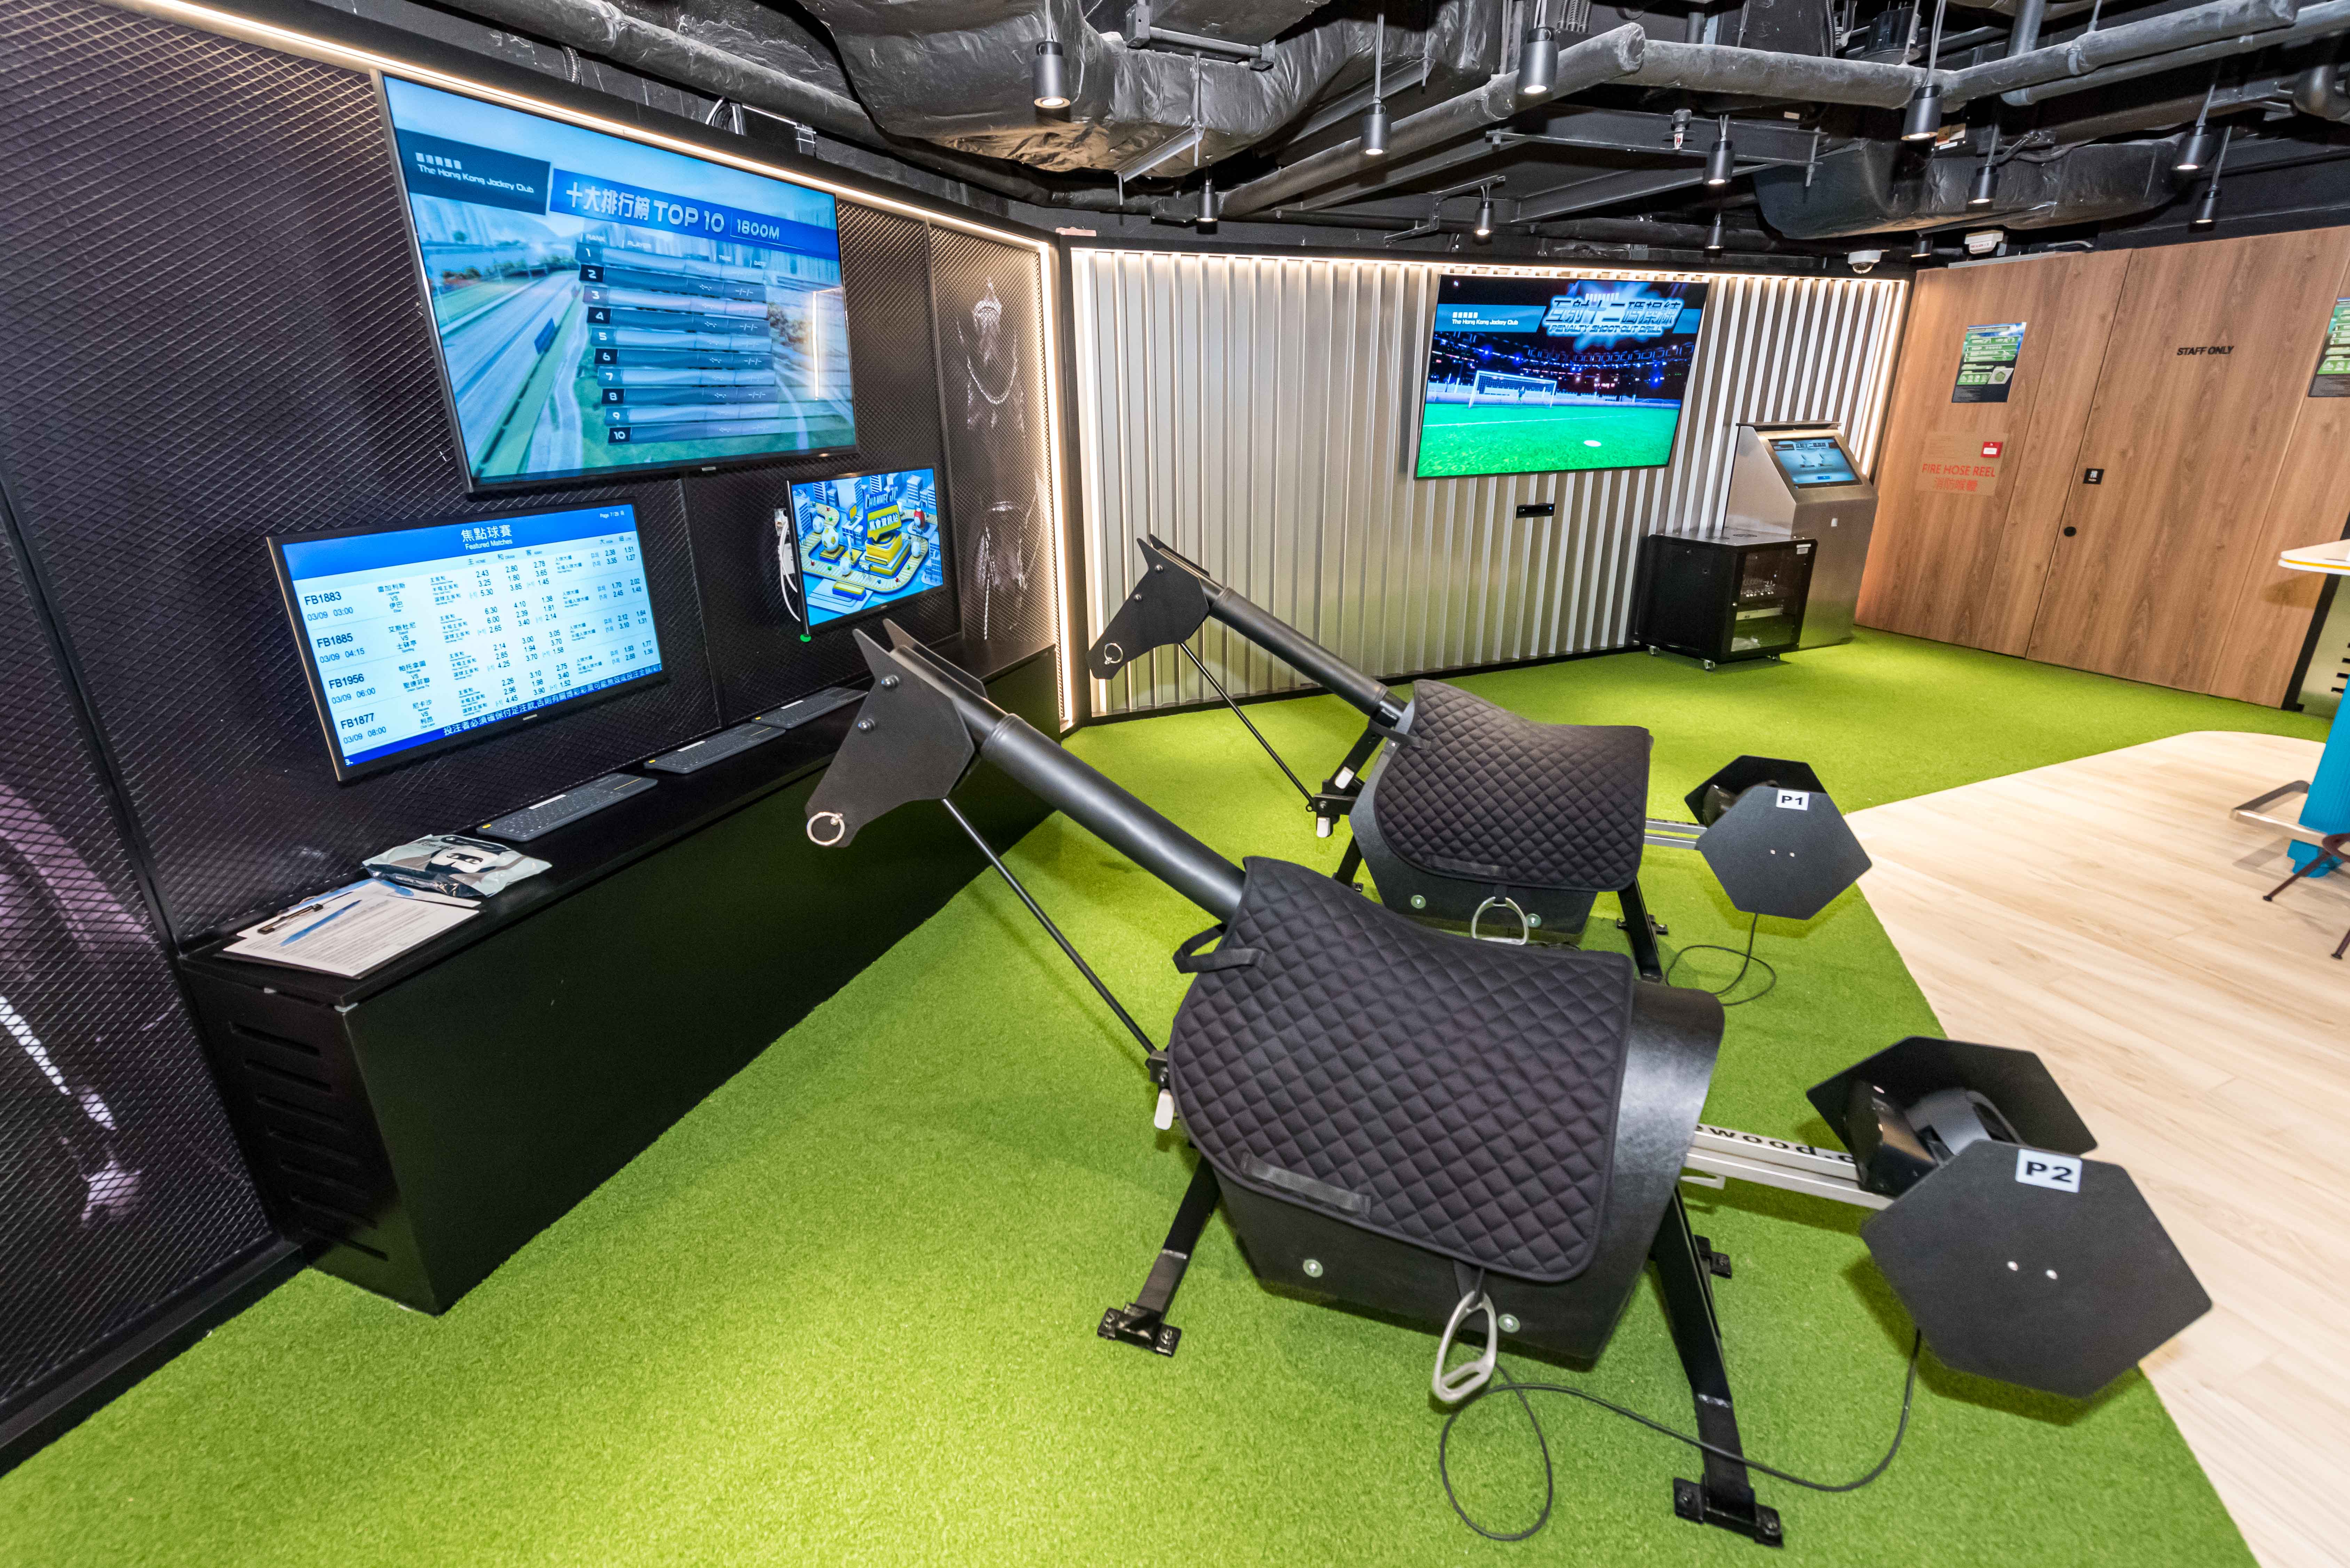 Jockey and football training simulators in the “Train to Win” zone provide horse racing and football training experience from a first-person perspective.